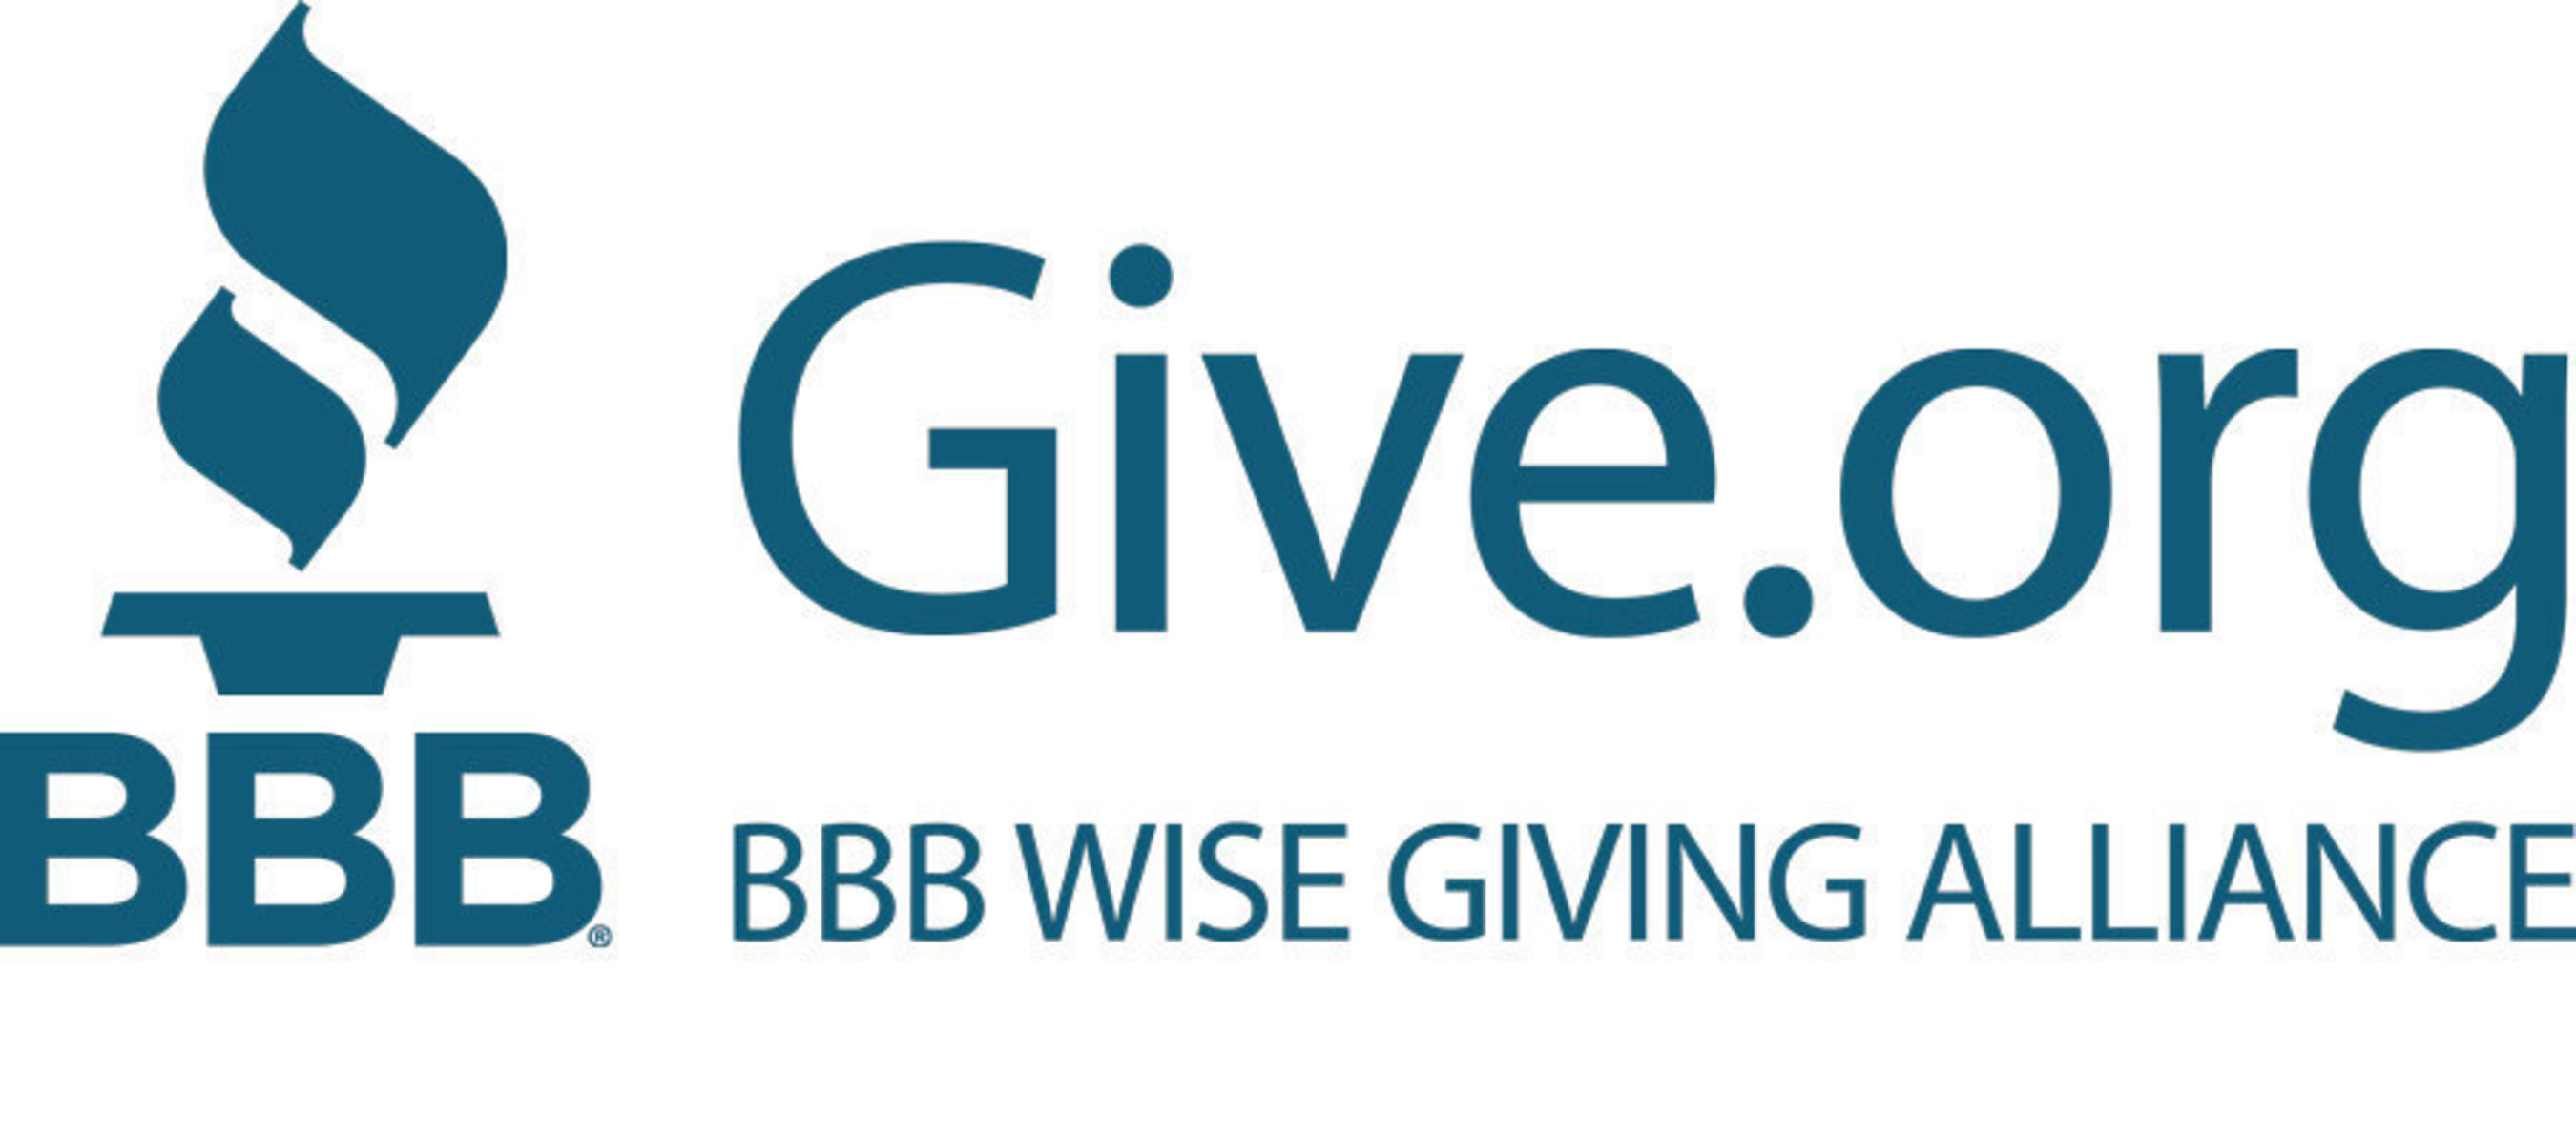 BBB Wise Giving Alliance logo